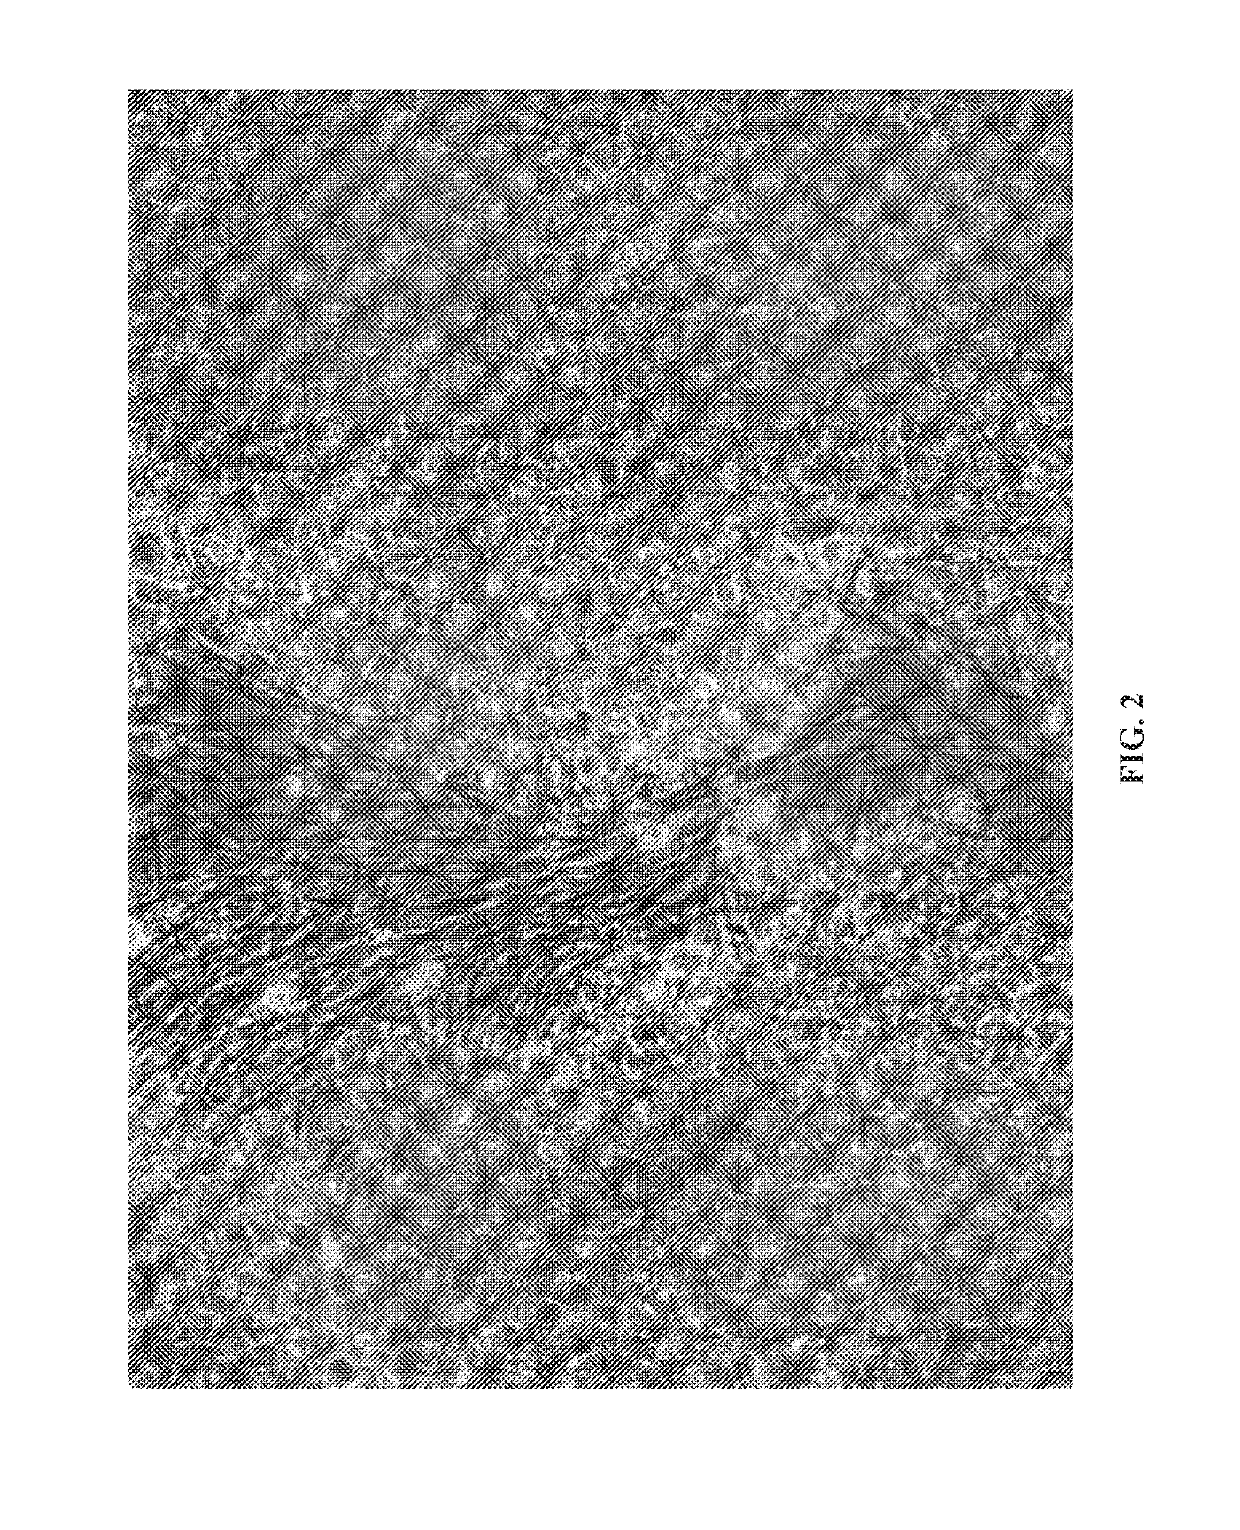 Fungal species, compositions derived therefrom, and uses thereof